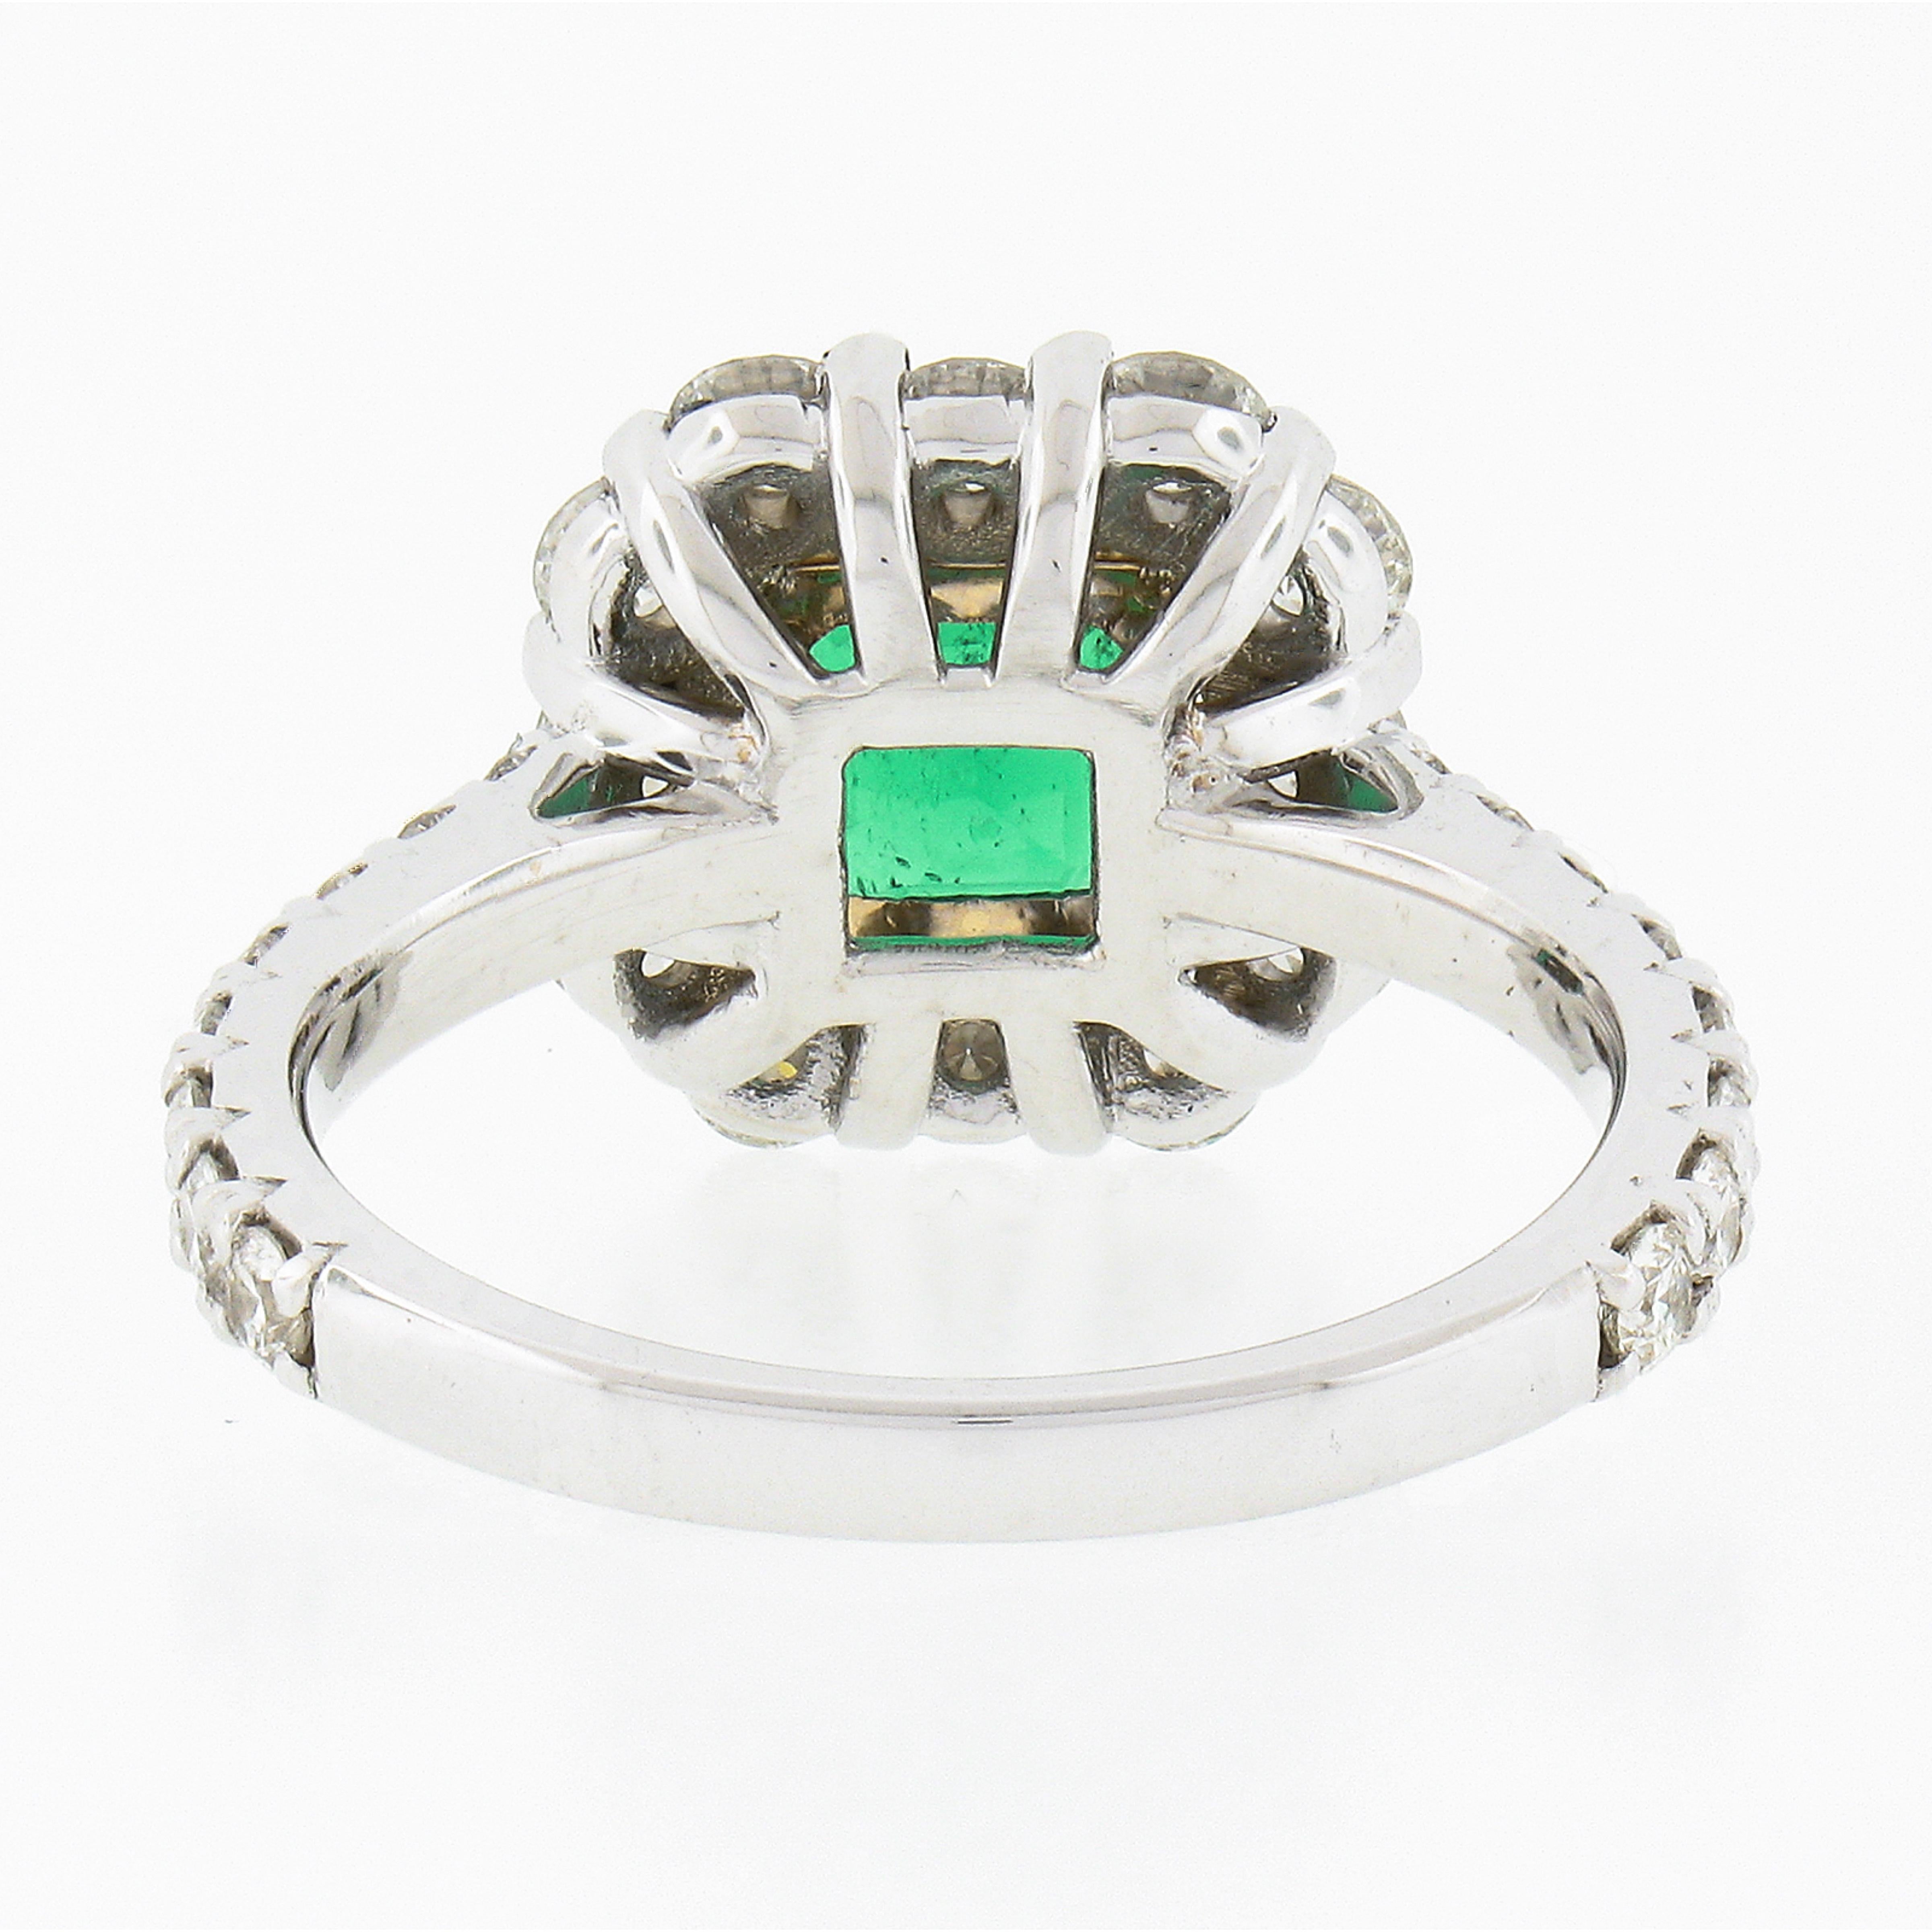 New 18k TT Gold 2.51ctw GIA Colombia Green Emerald w/ Diamond Halo Cocktail Ring For Sale 1